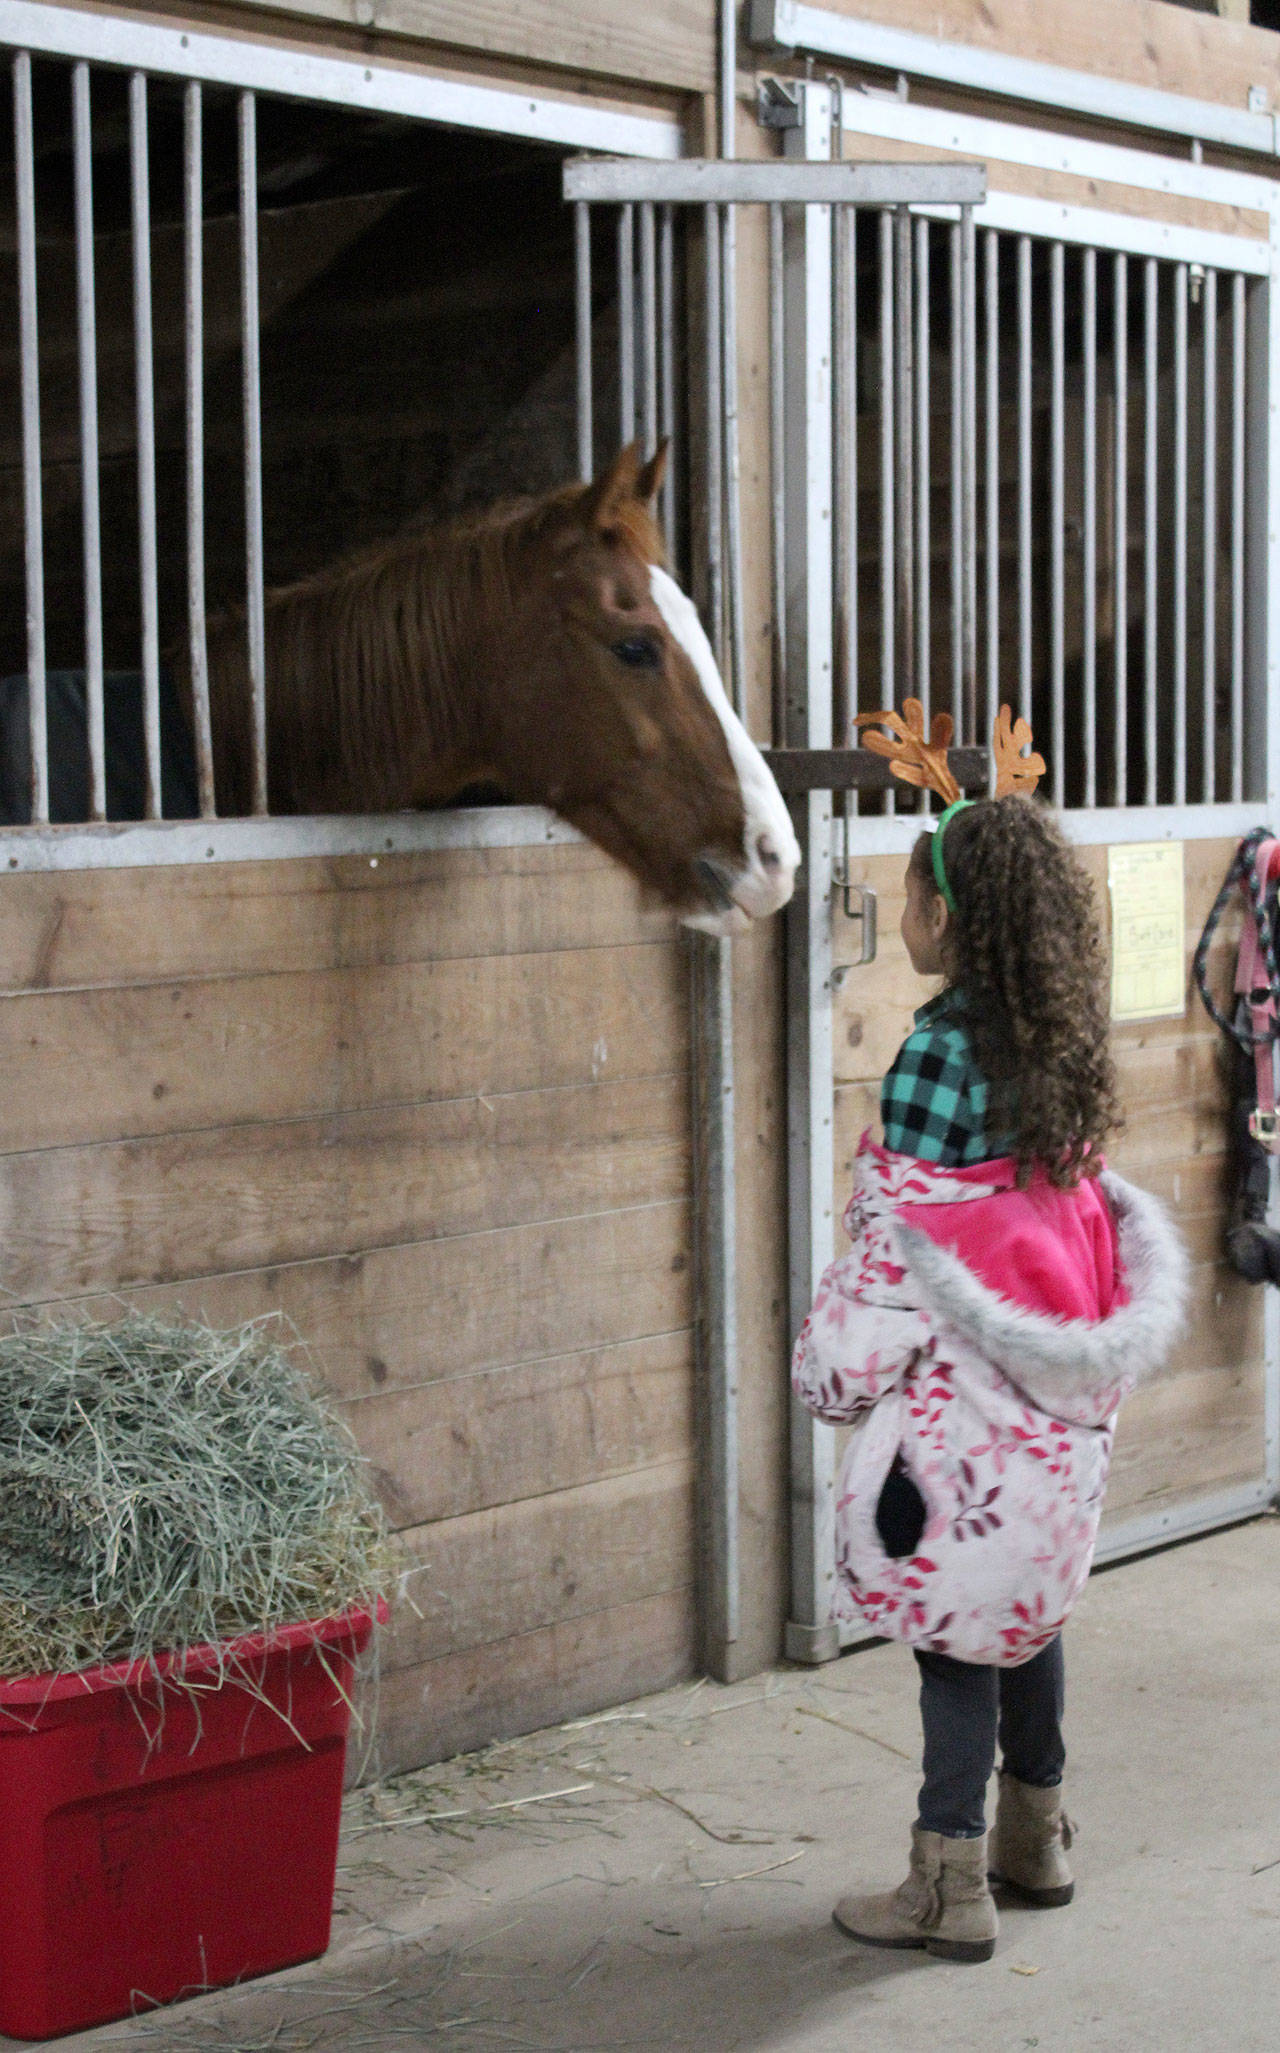 Port Orchard foster children were invited to The Riding Place to meet and even ride horses, as well as Santa.                                Michelle Beahm / Kitsap News Group